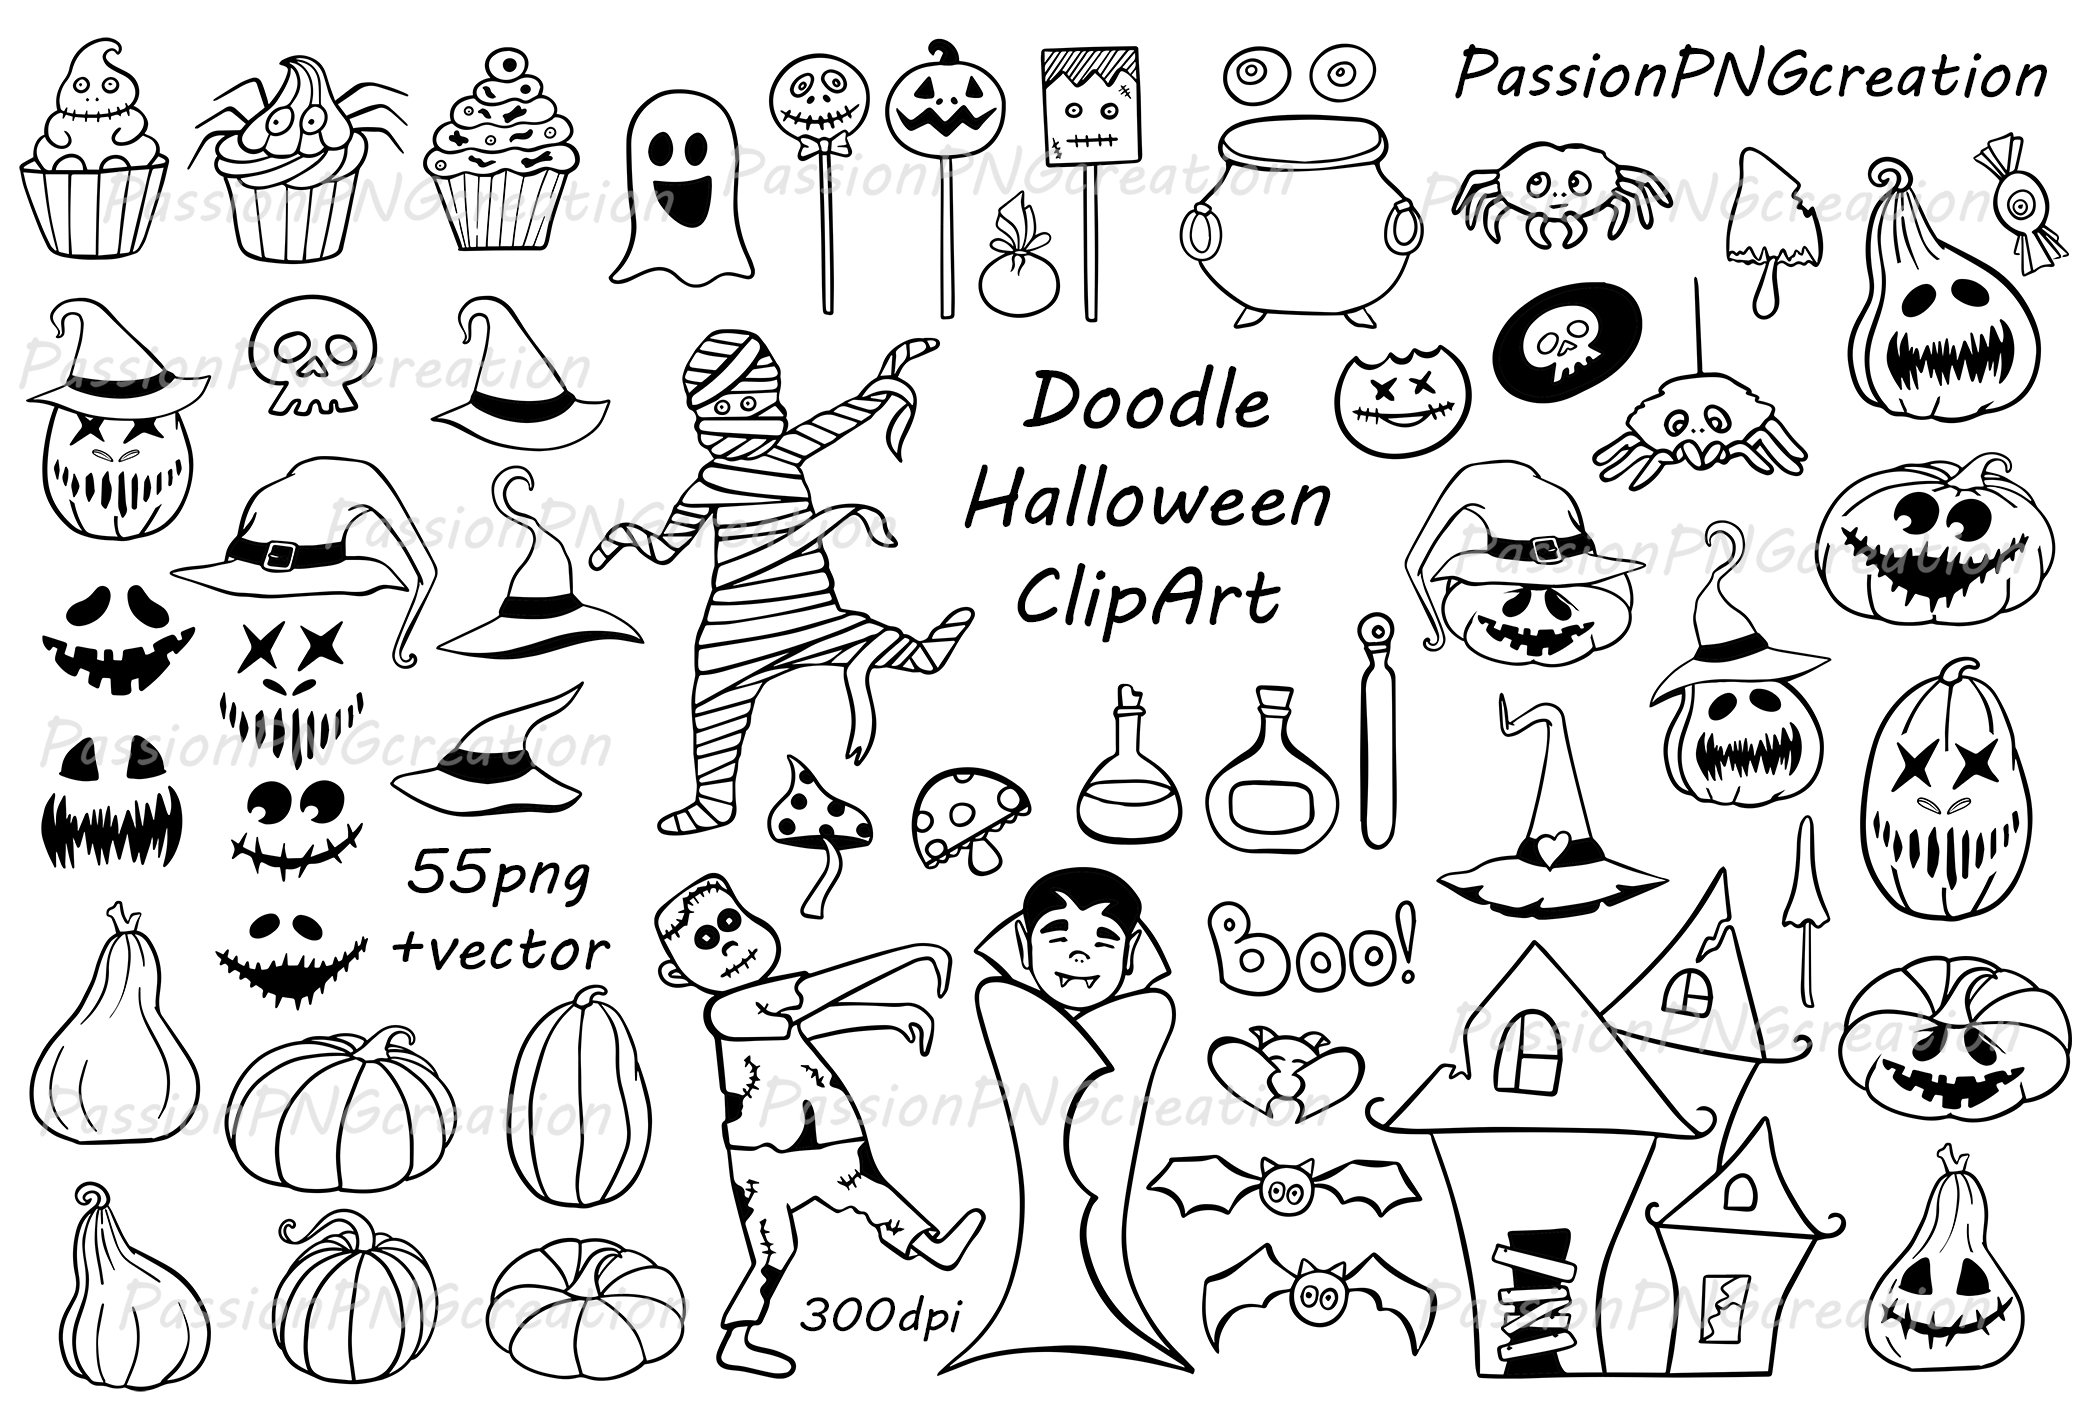 White background with black Halloween monsters.